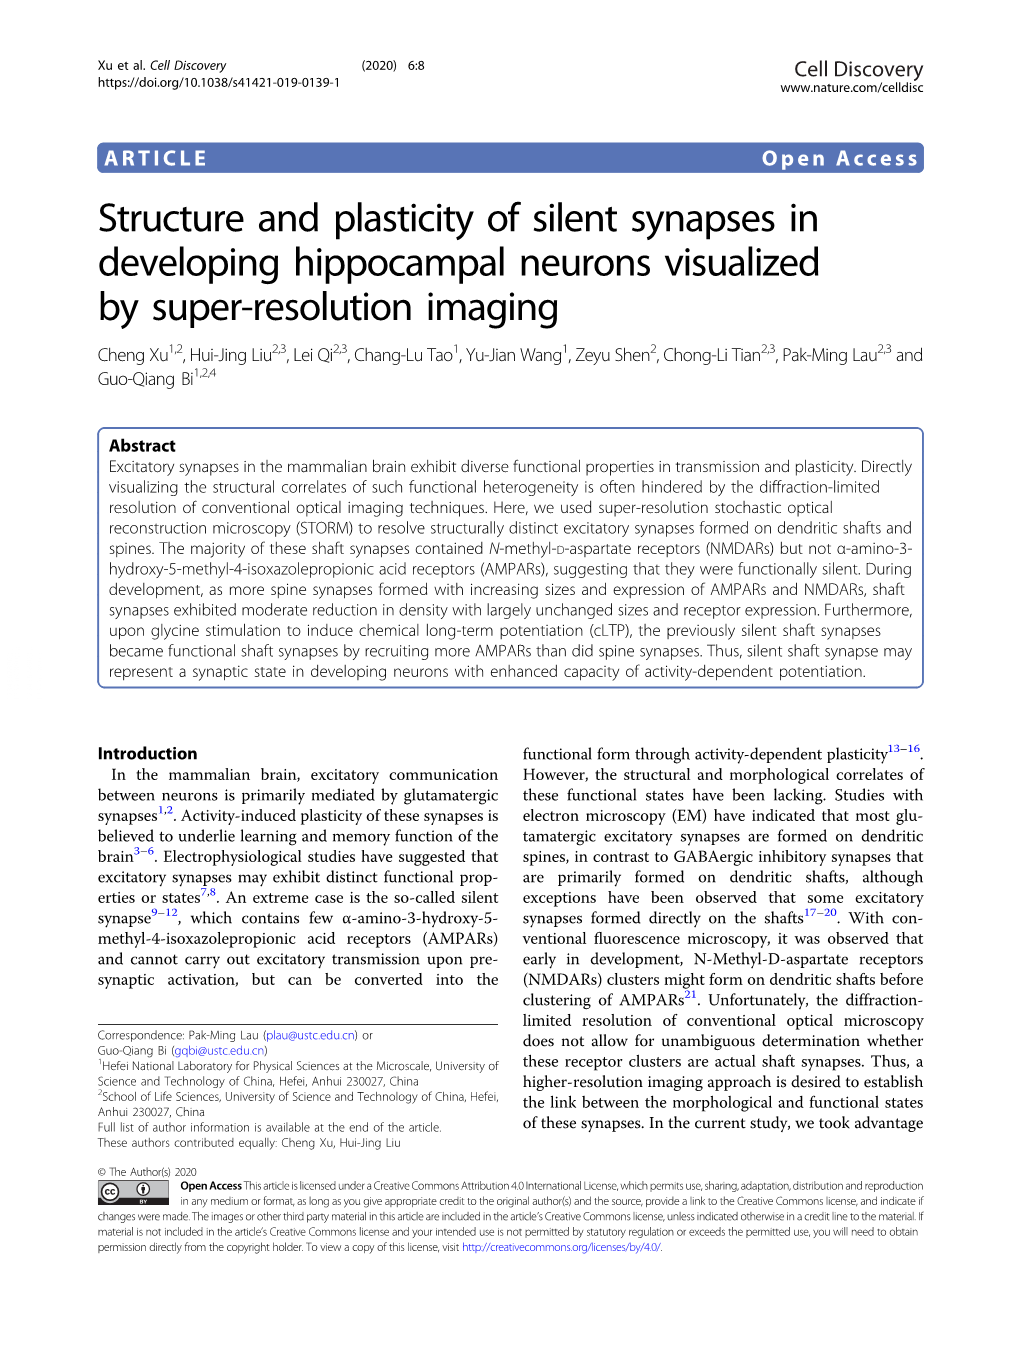 Structure and Plasticity of Silent Synapses in Developing